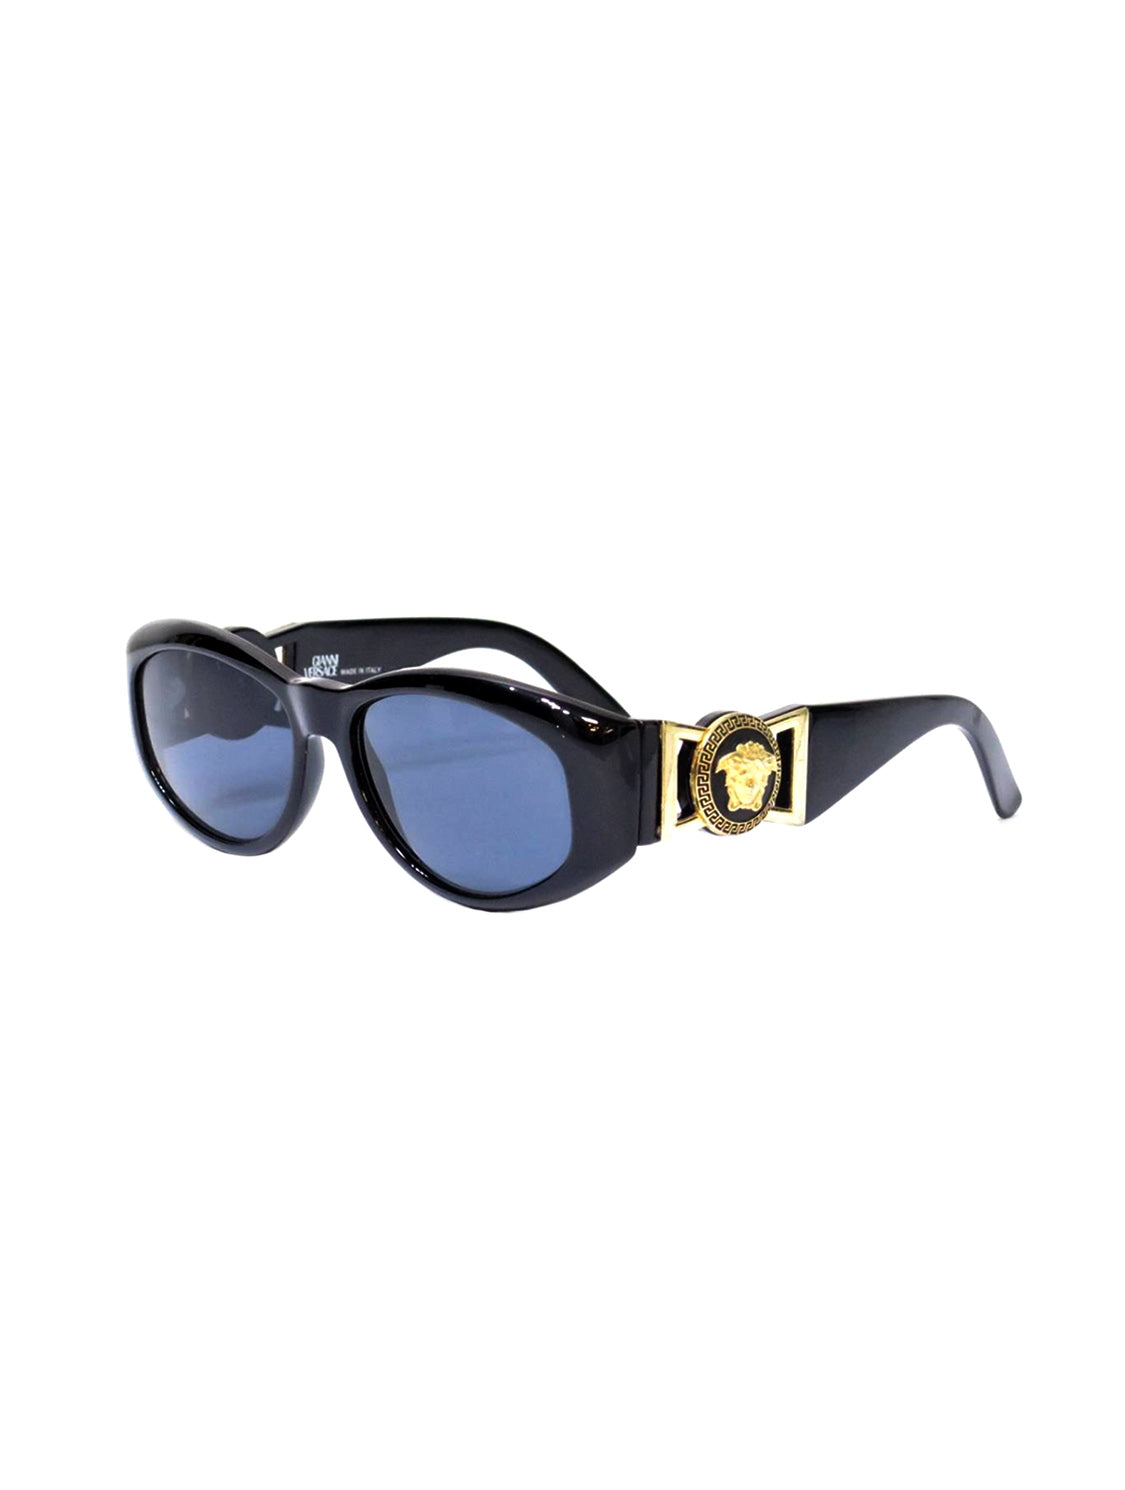 Gianni Versace 2000s Blue Tinted Gold Coin Sunglasses